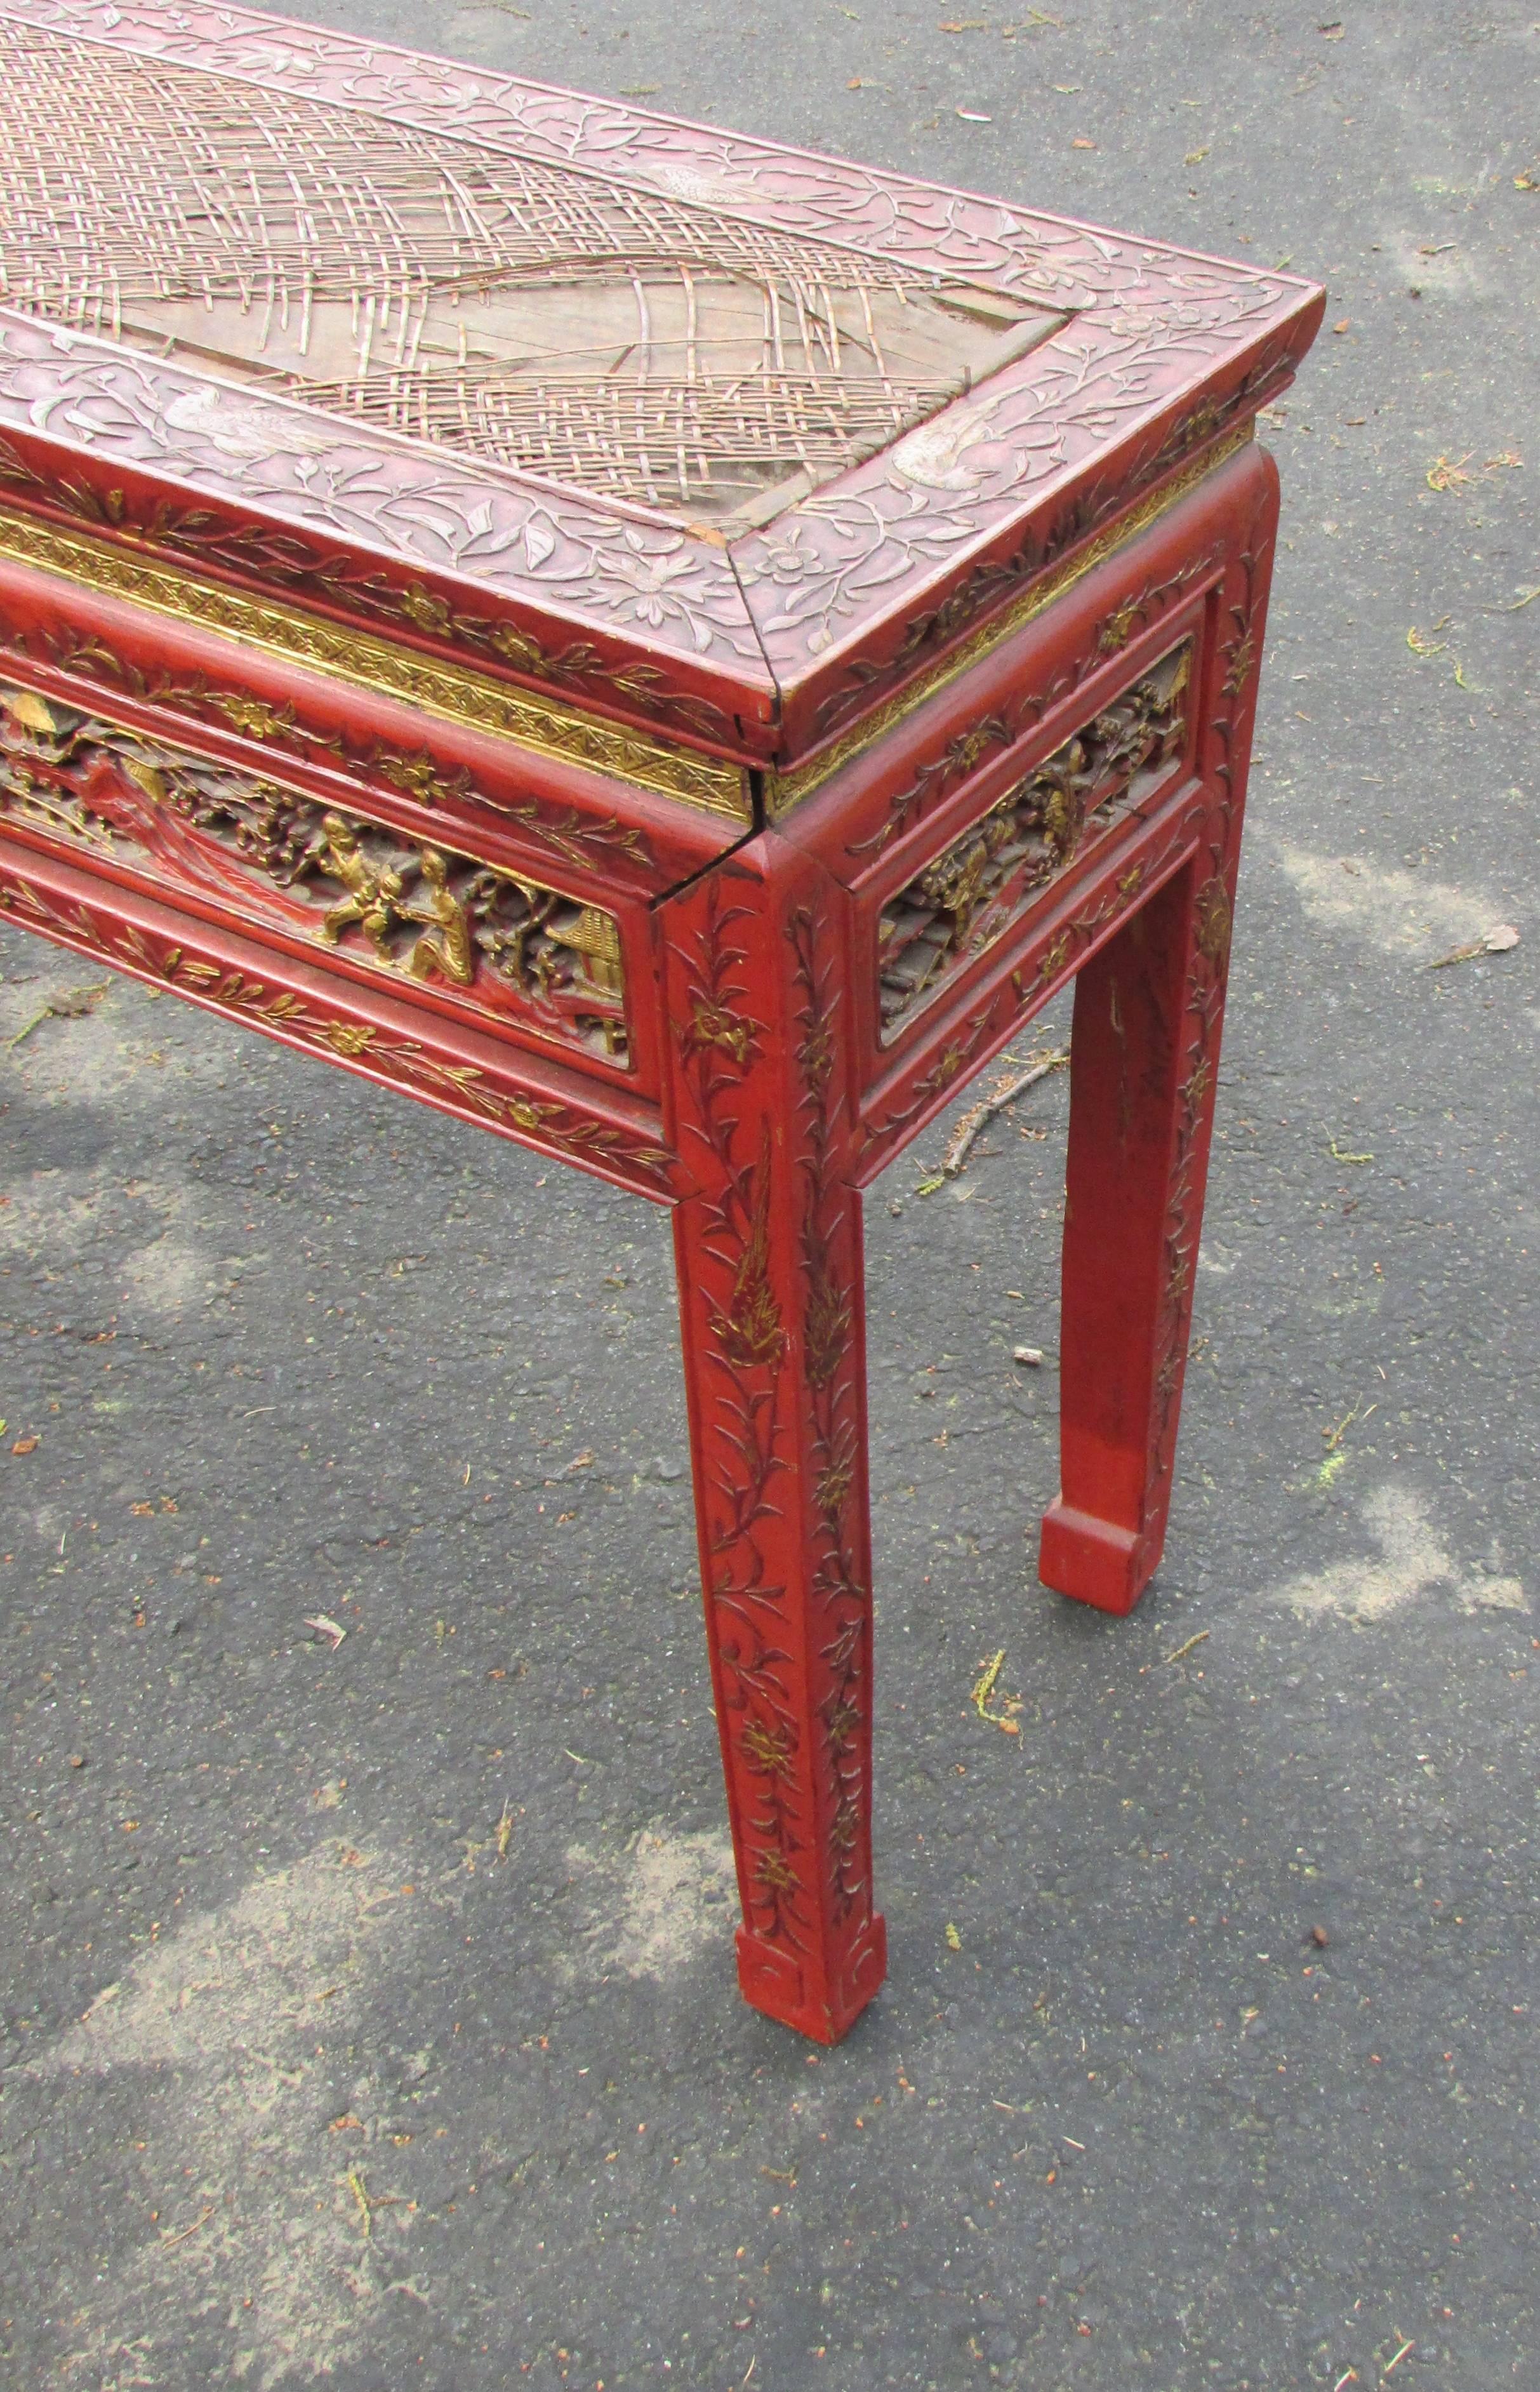 Rattan Antique Chinese Chinoiserie Lacquered Console Table